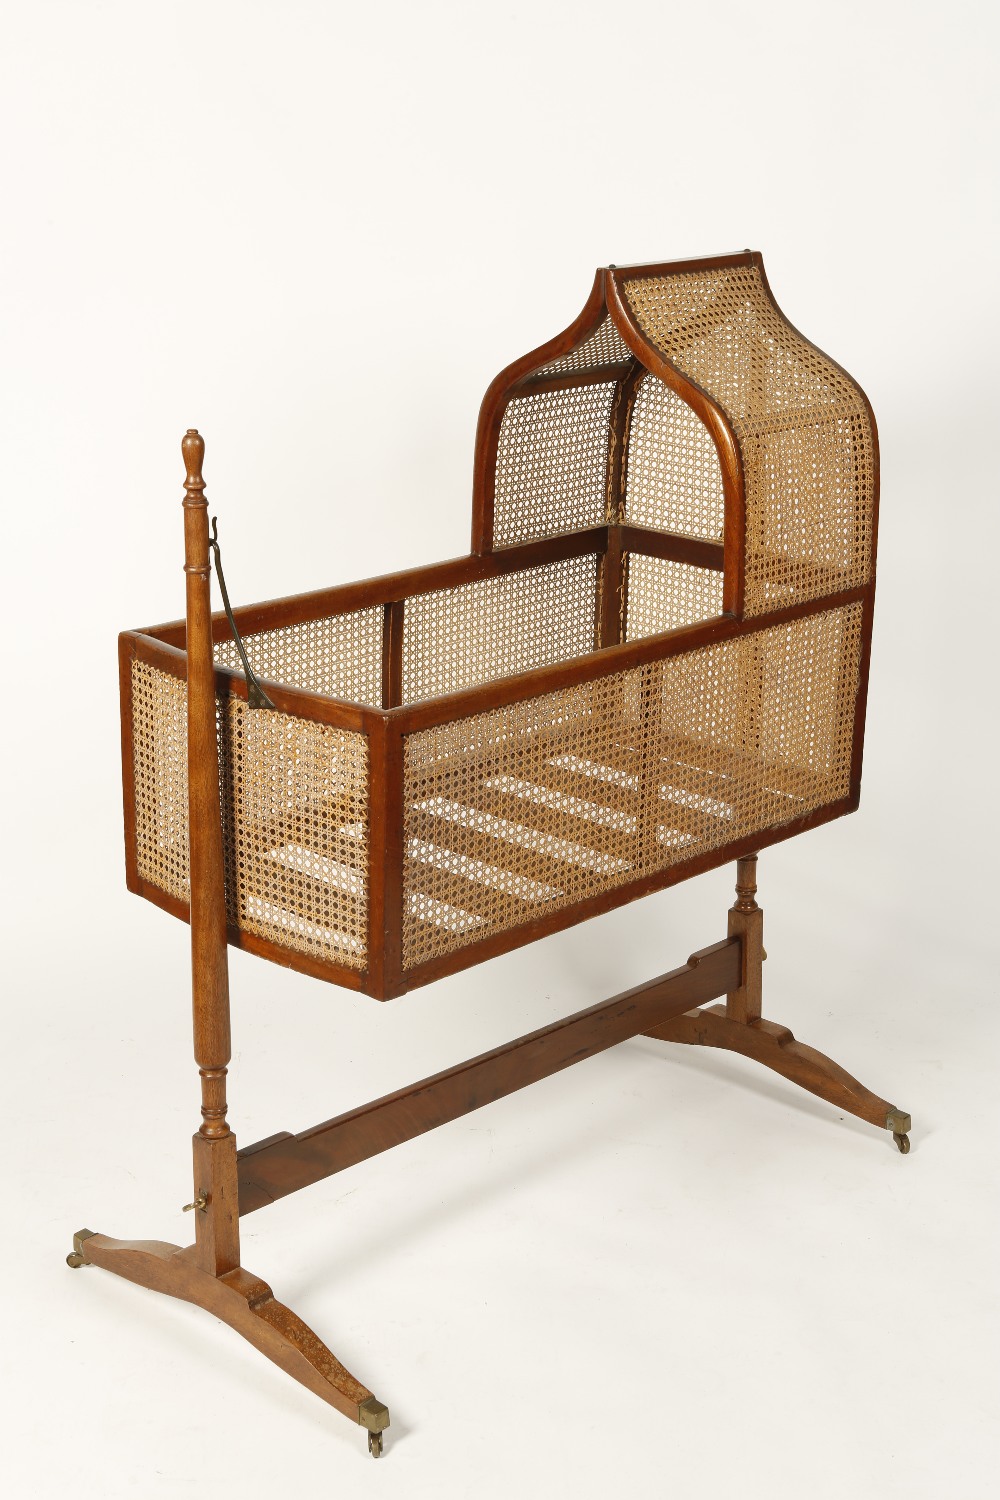 A REGENCY MAHOGANY ROCKING CRADLE with a cane-work cradle on turned uprights and downswept legs with